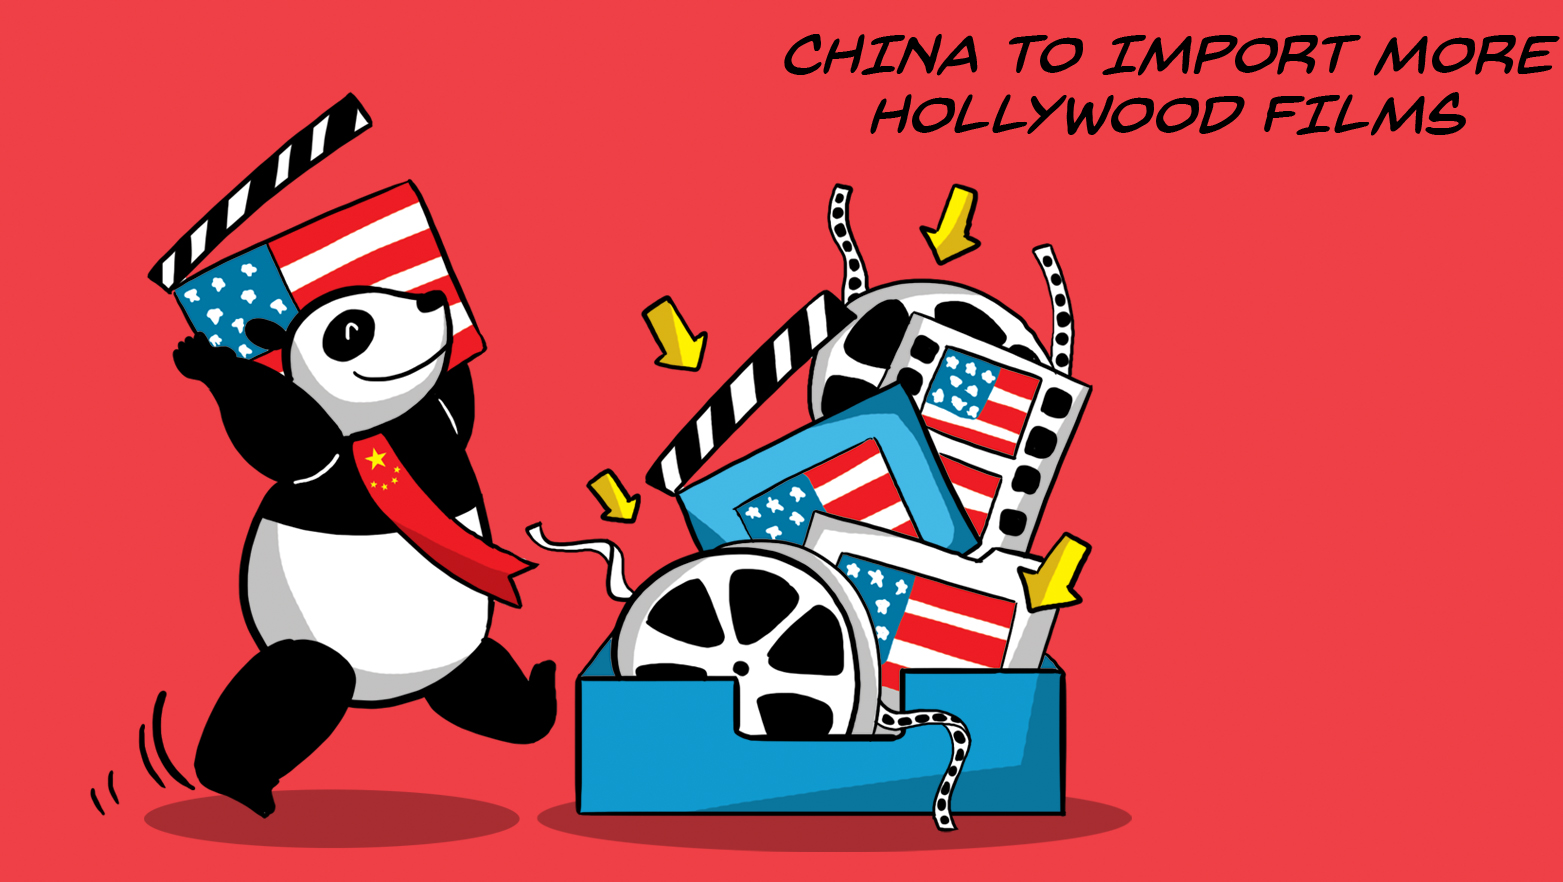 China to import more Hollywood films